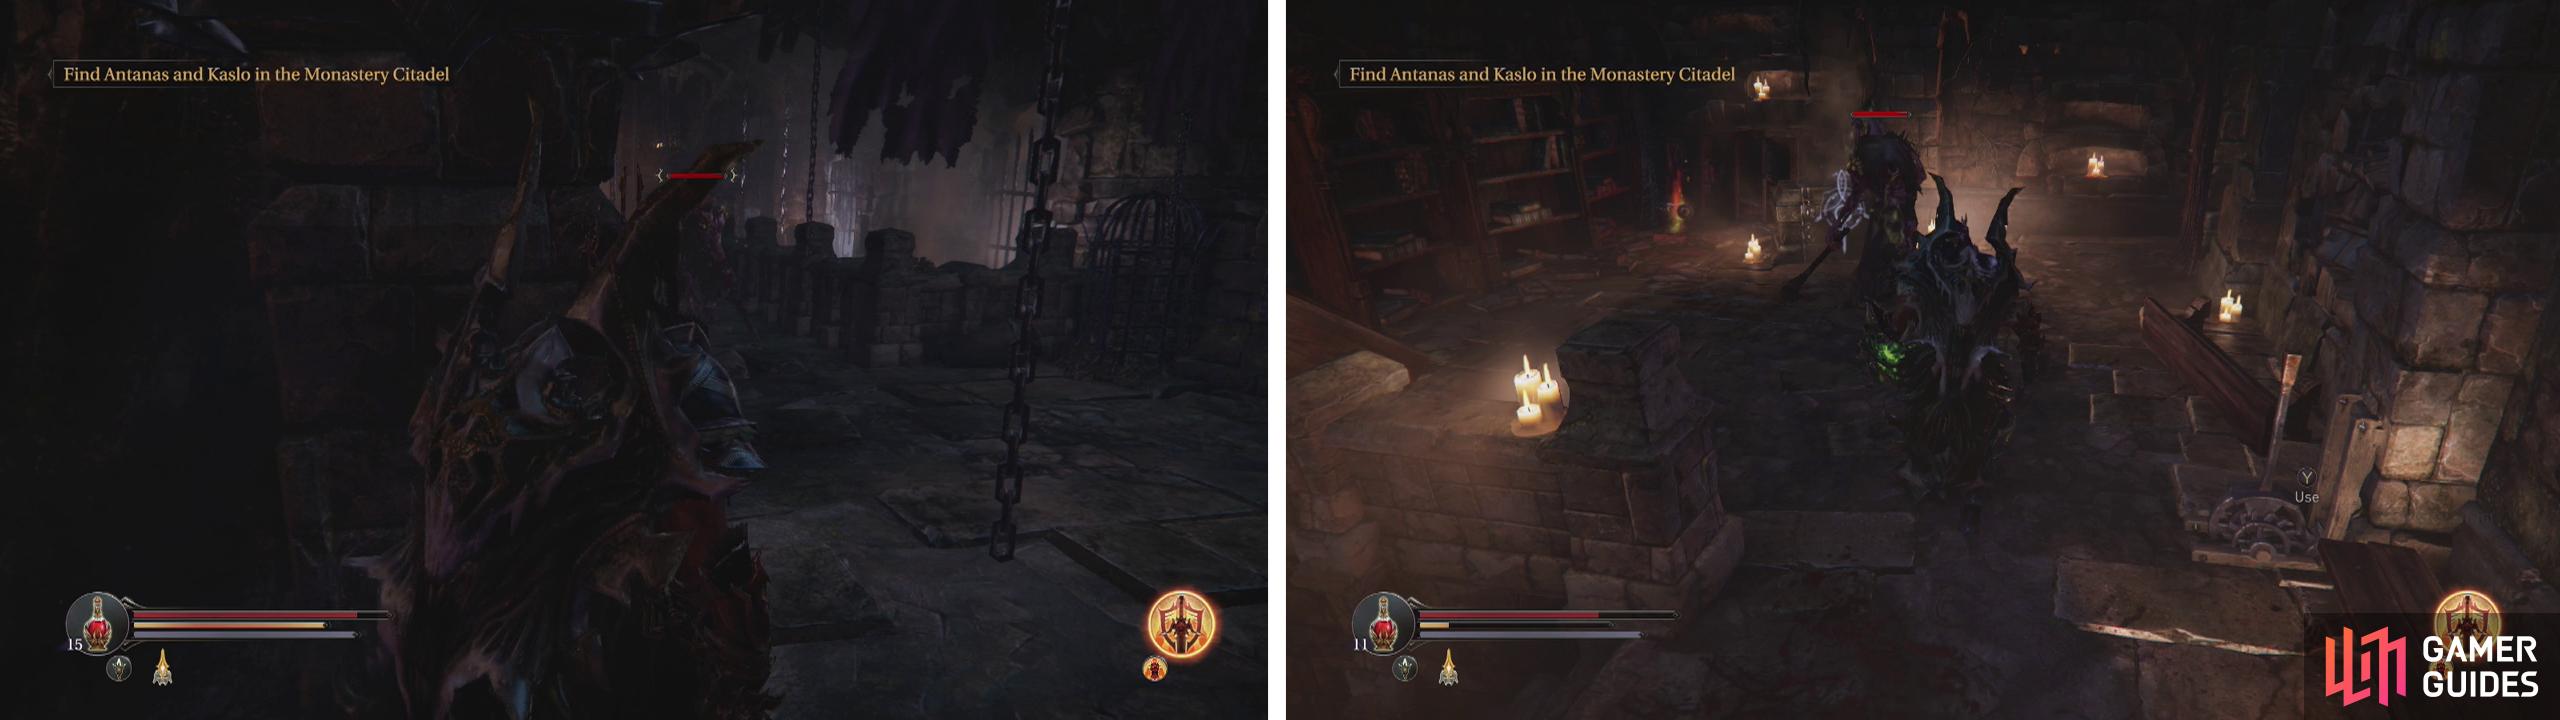 Clear the enemies out of the room with three exits (left). at the top of the left exit kill the Infected for a chest, Audio Note and shortcut back to the Catacombs entrance (right).